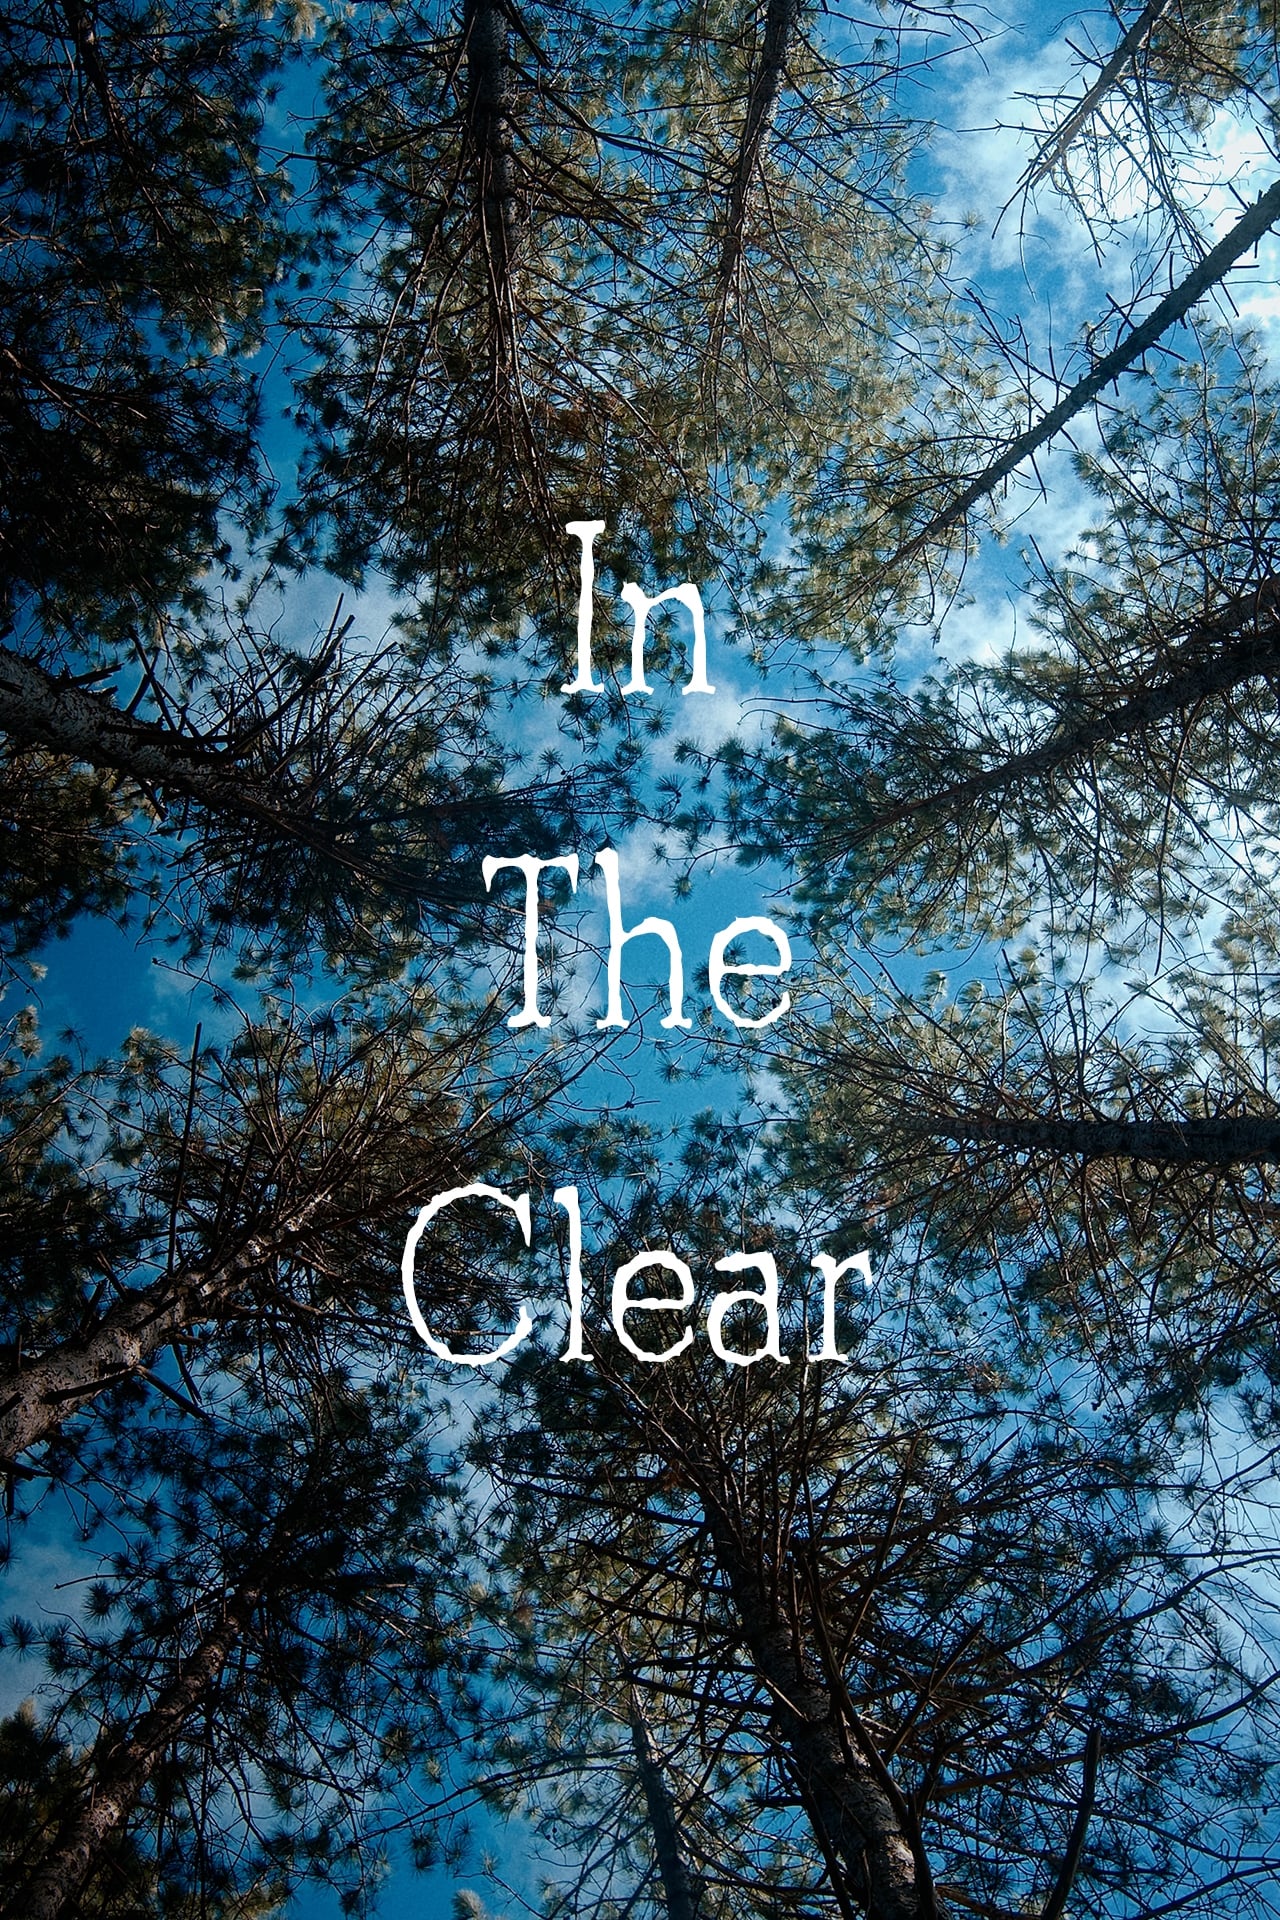 In the Clear